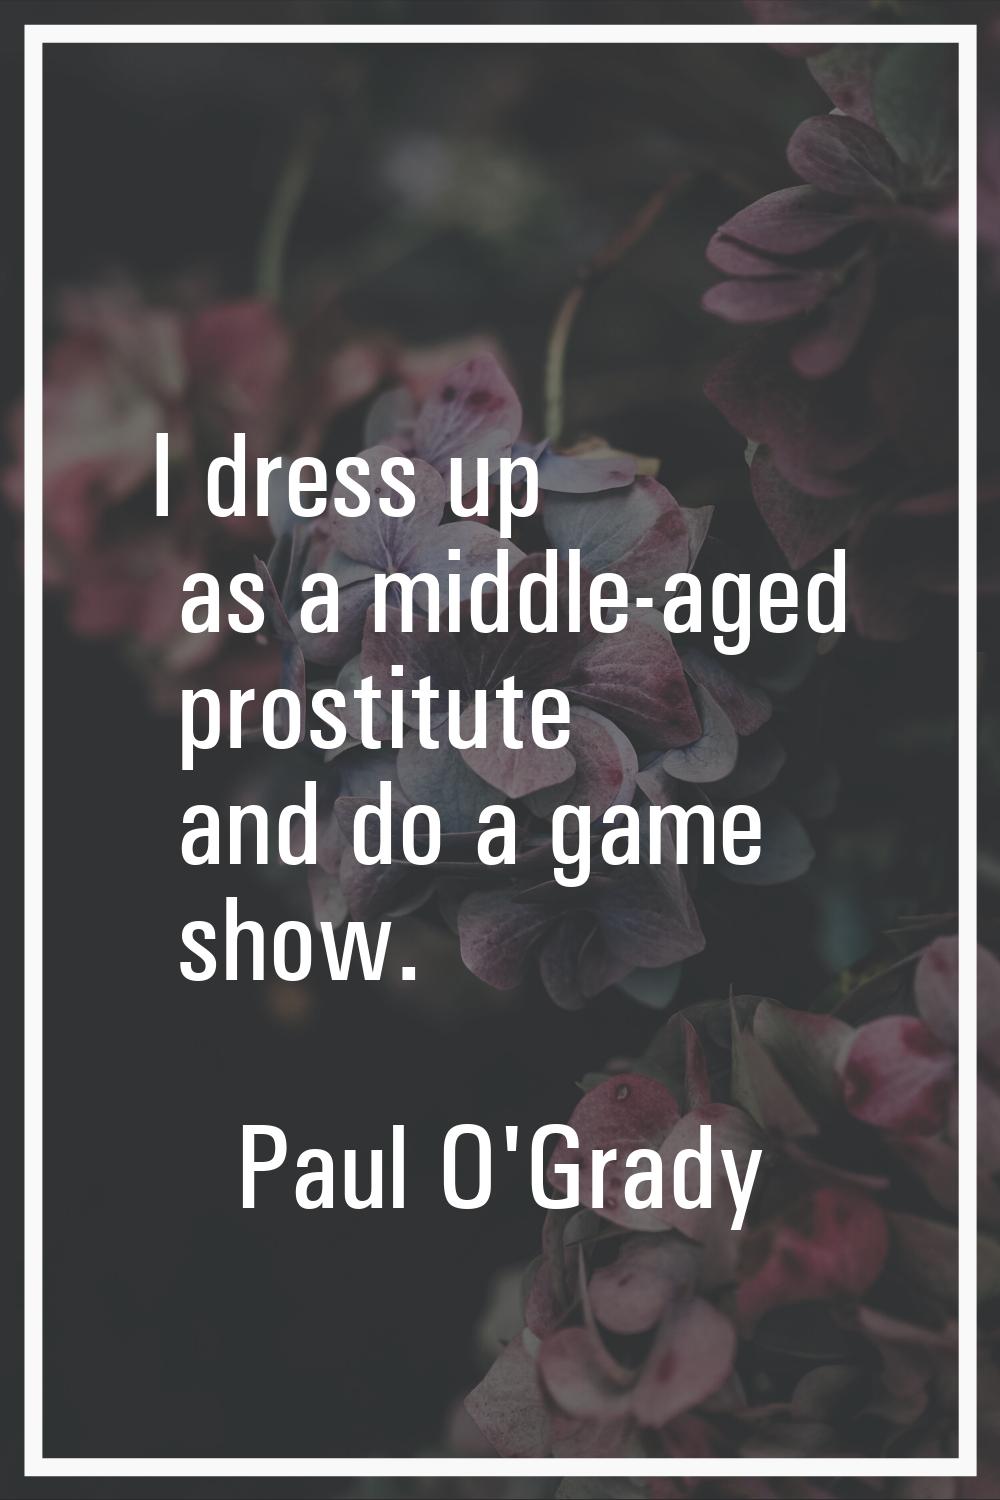 I dress up as a middle-aged prostitute and do a game show.